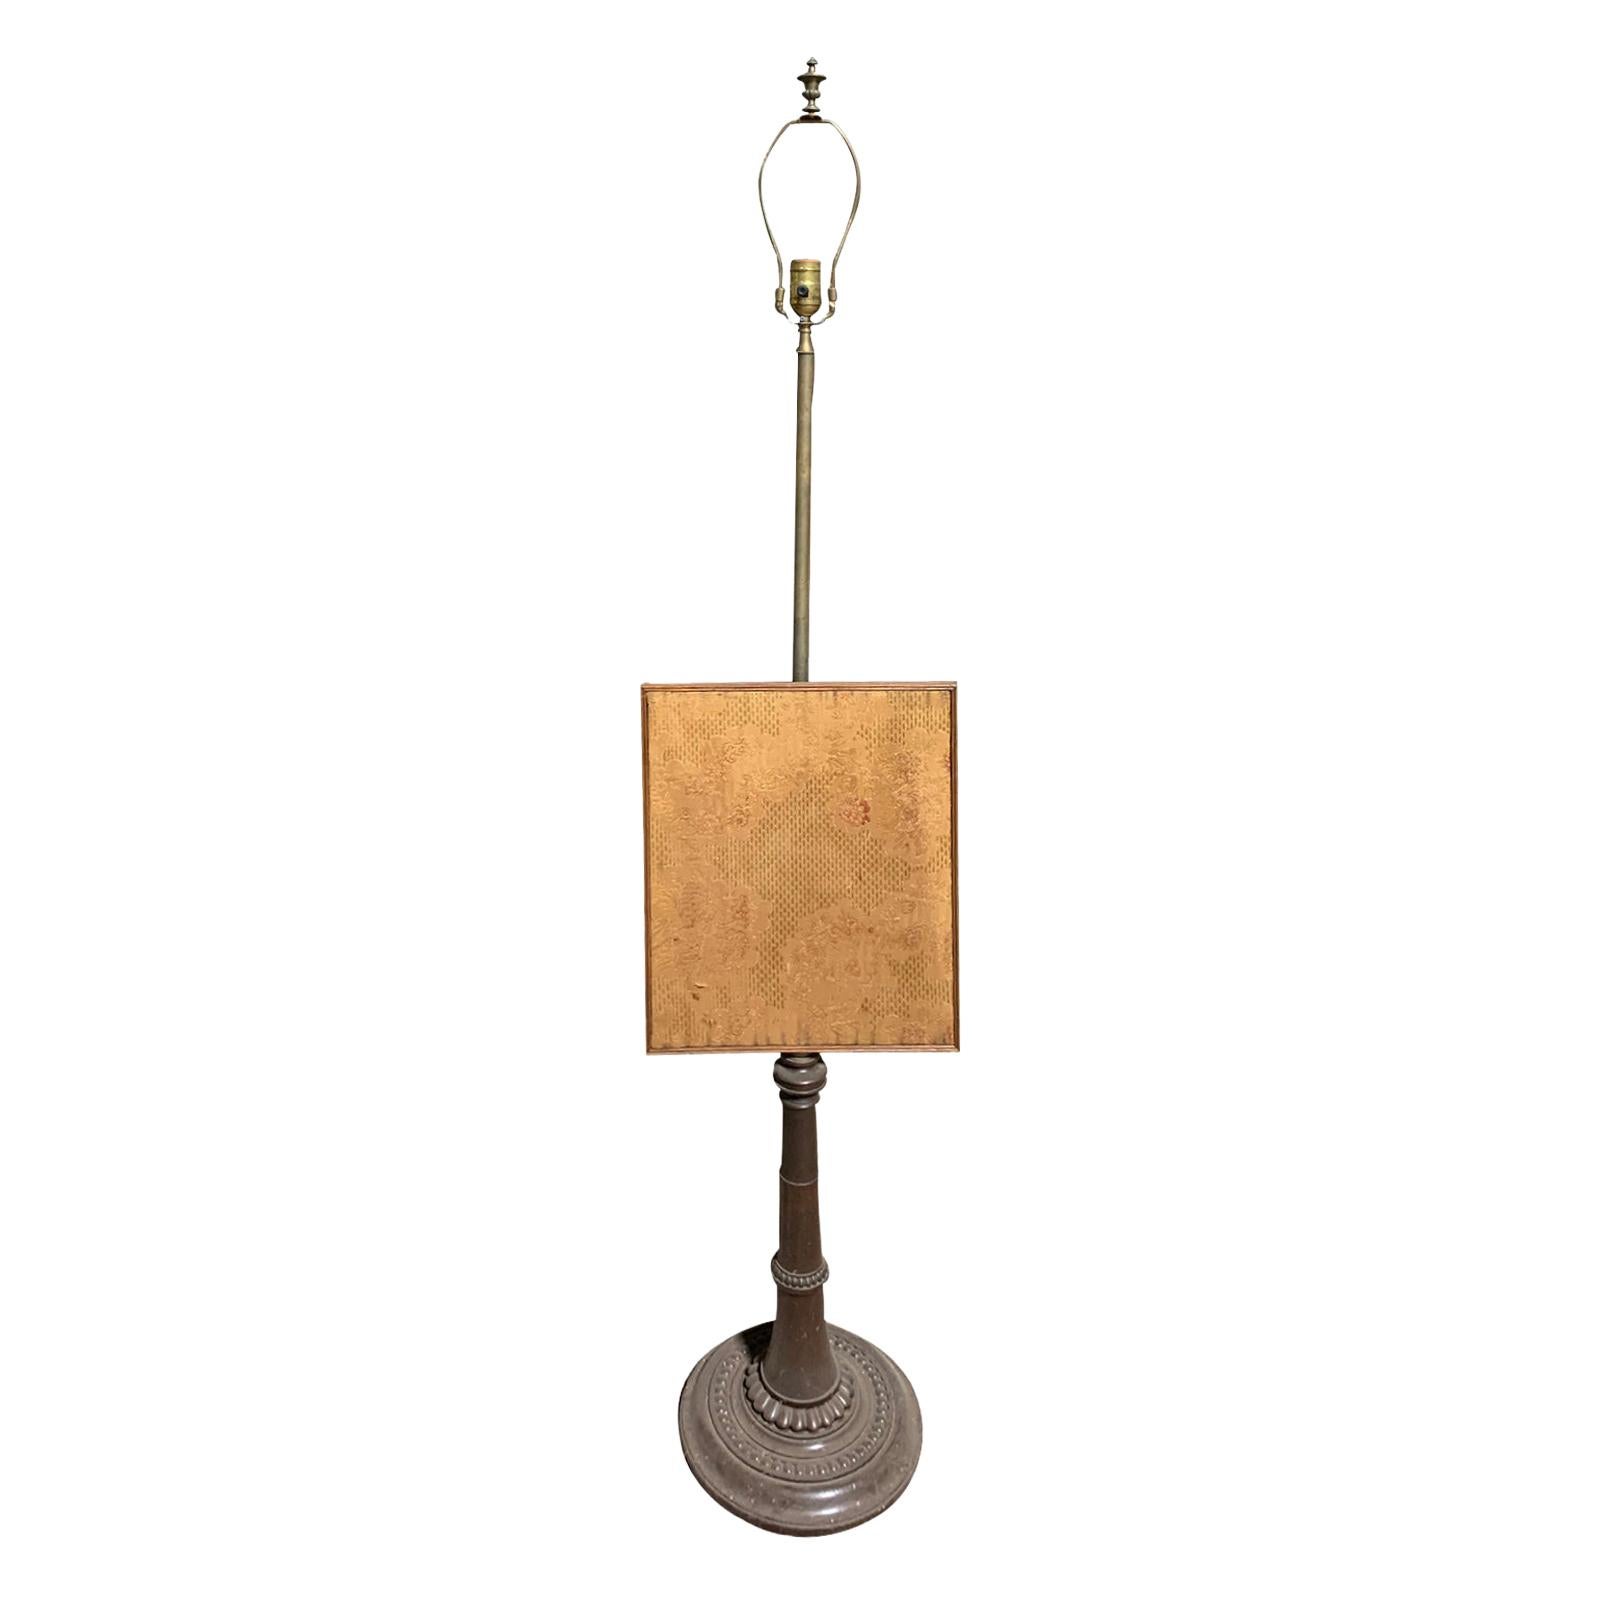 19th Century Regency Style Metal Fire Pole with Fabric Screen as Floor Lamp For Sale